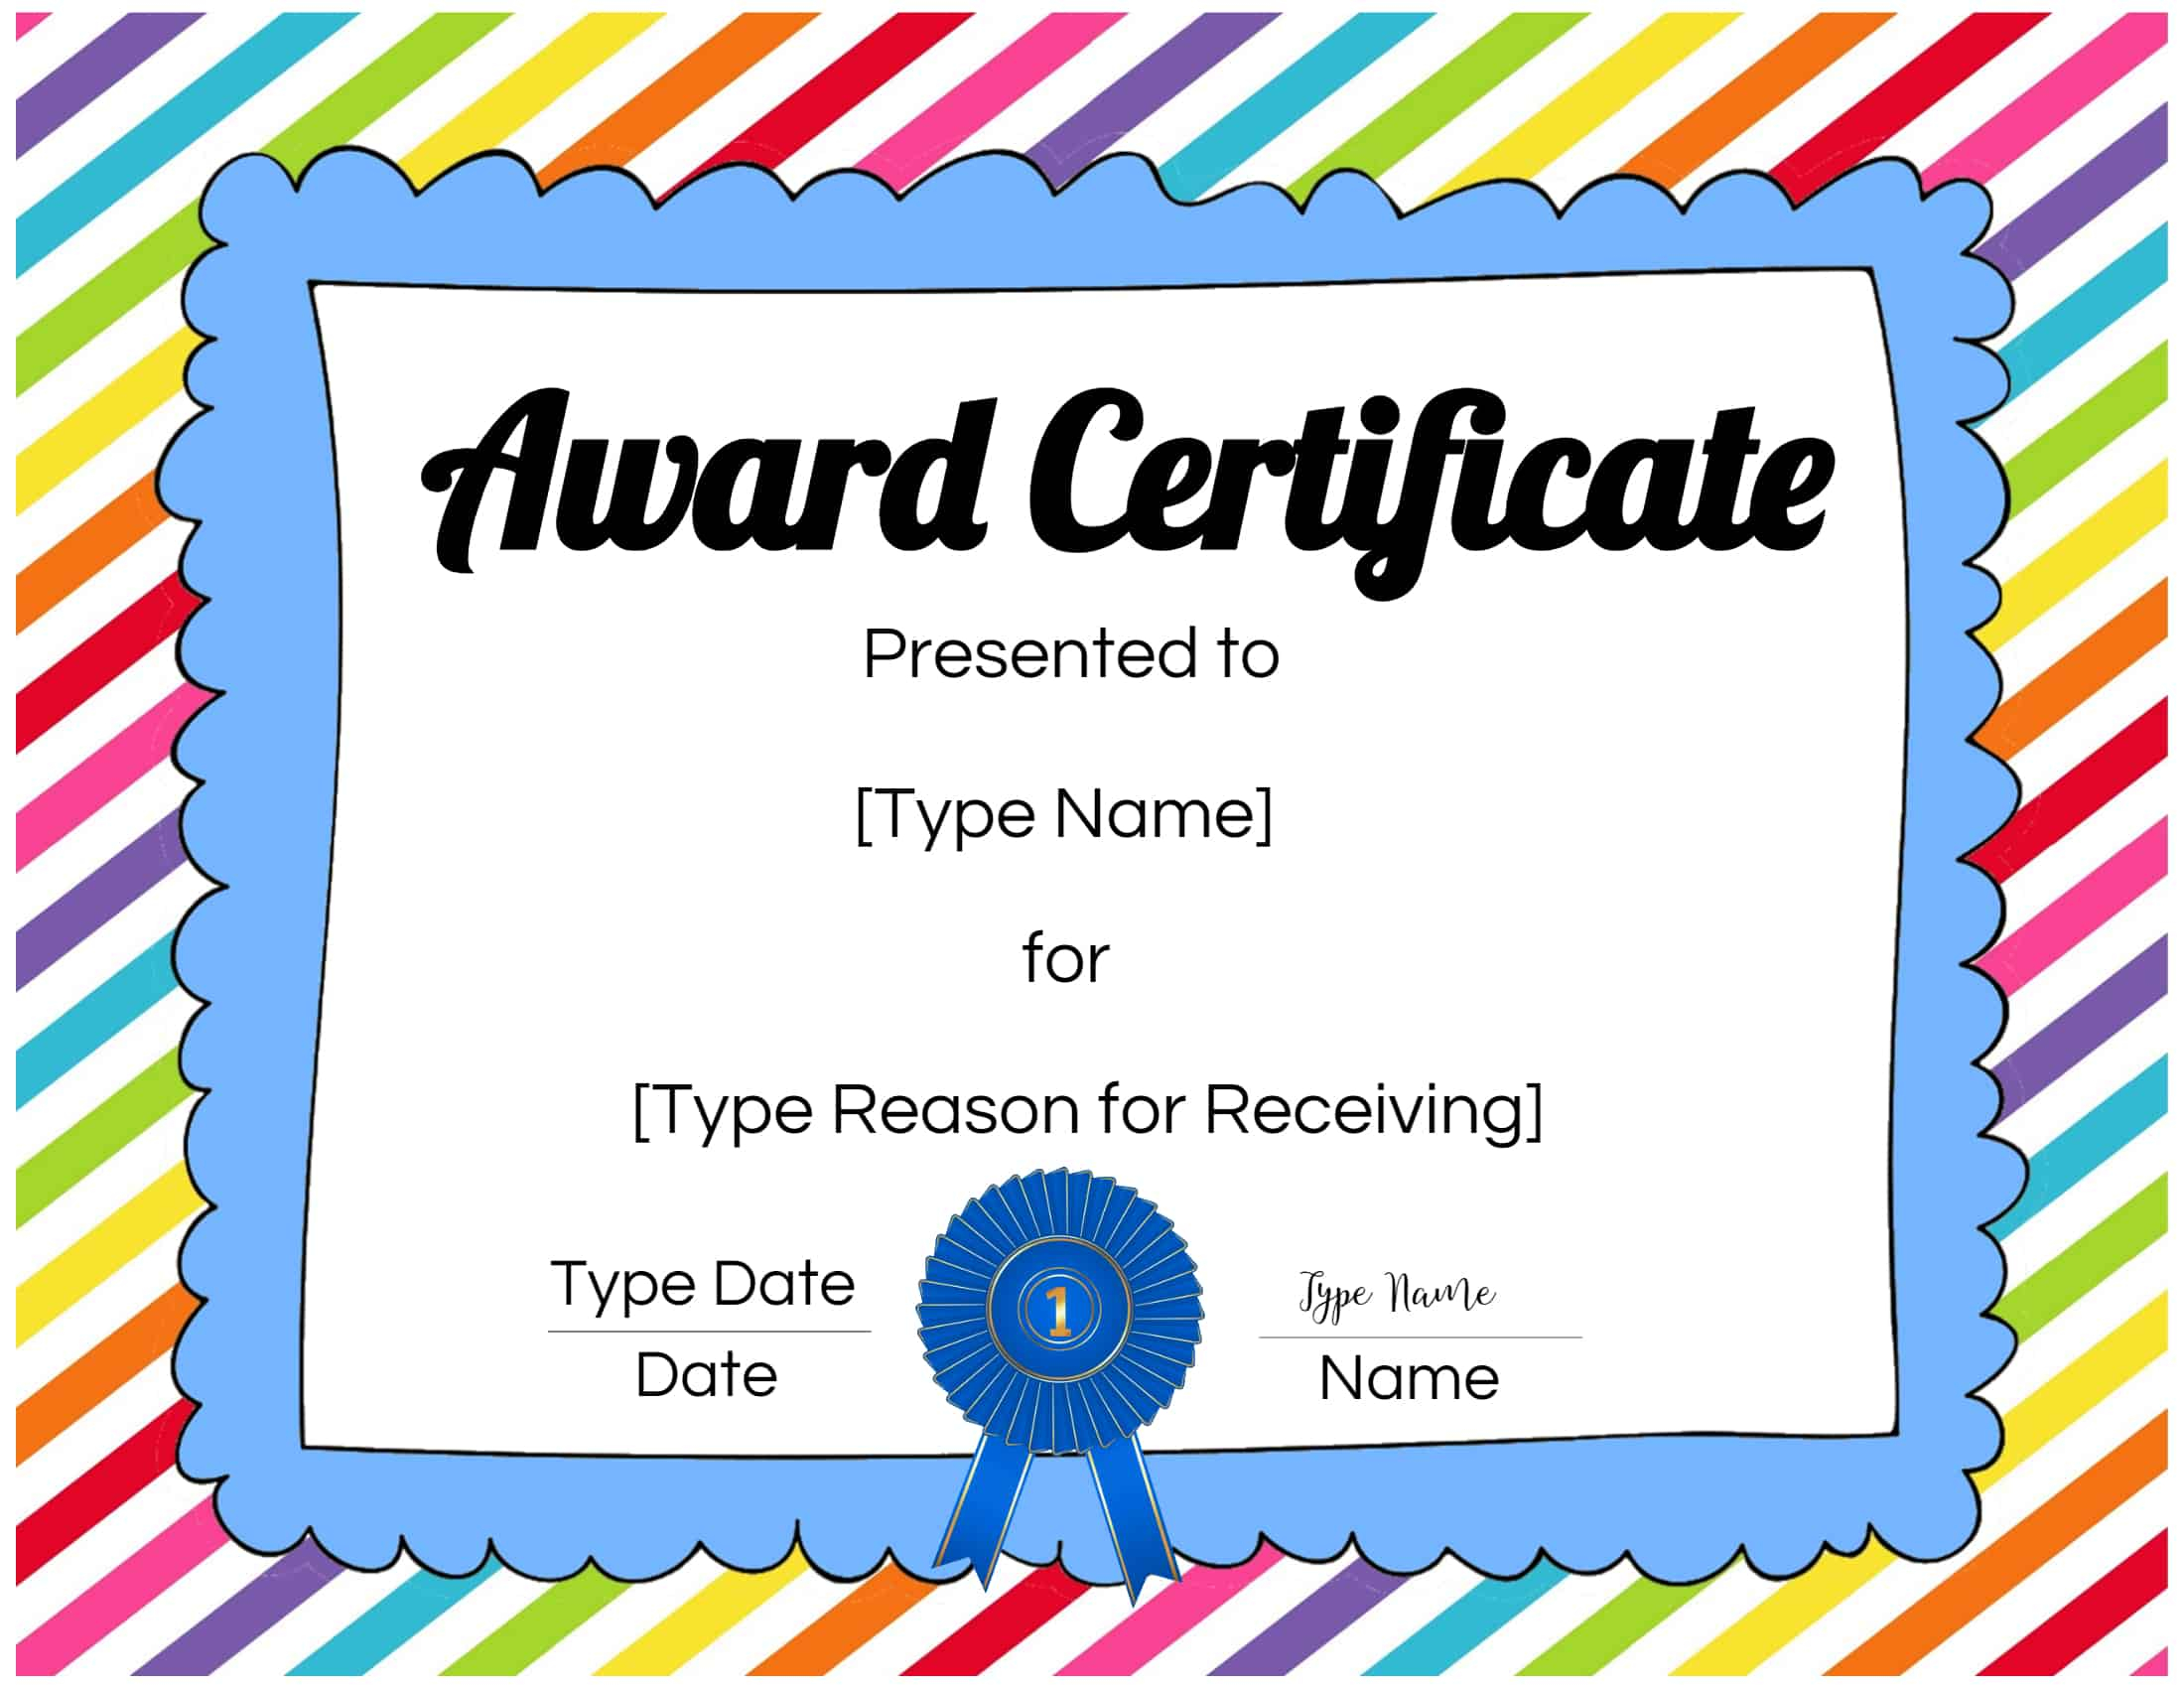 Free Custom Certificates For Kids Customize Online Print At Home